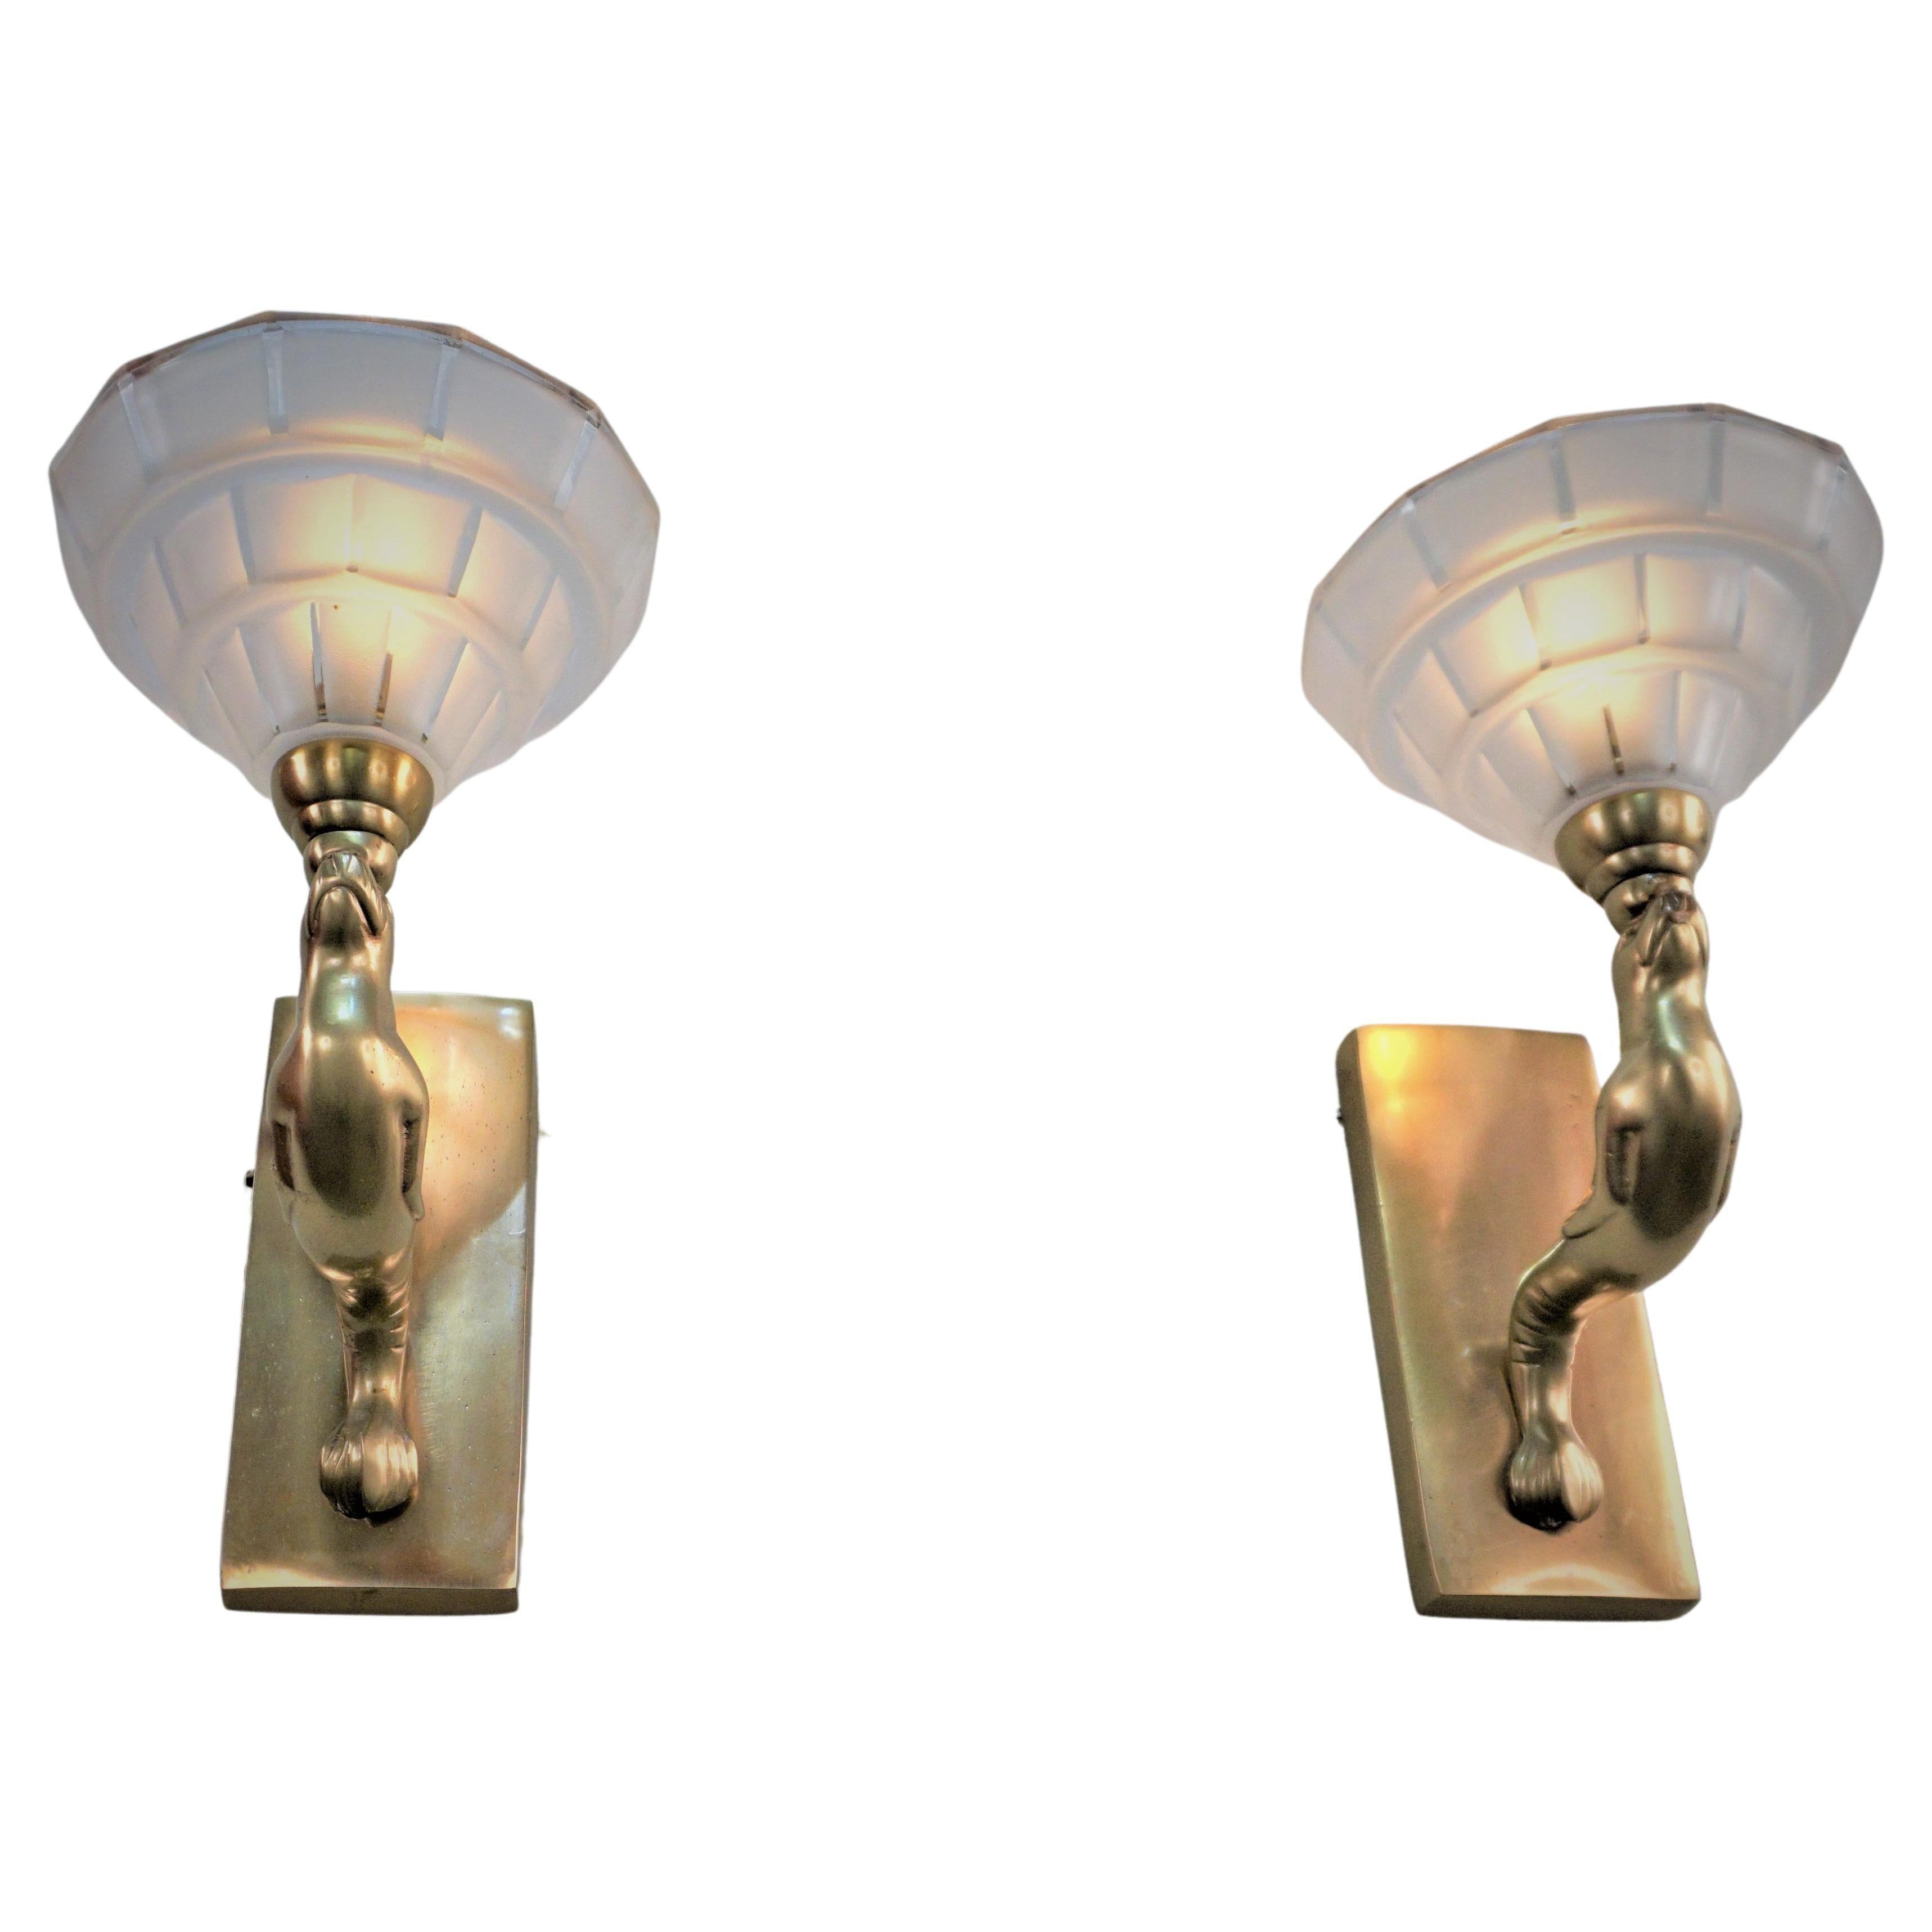 French Art Deco Seal Wall Sconces - 2 pairs For Sale